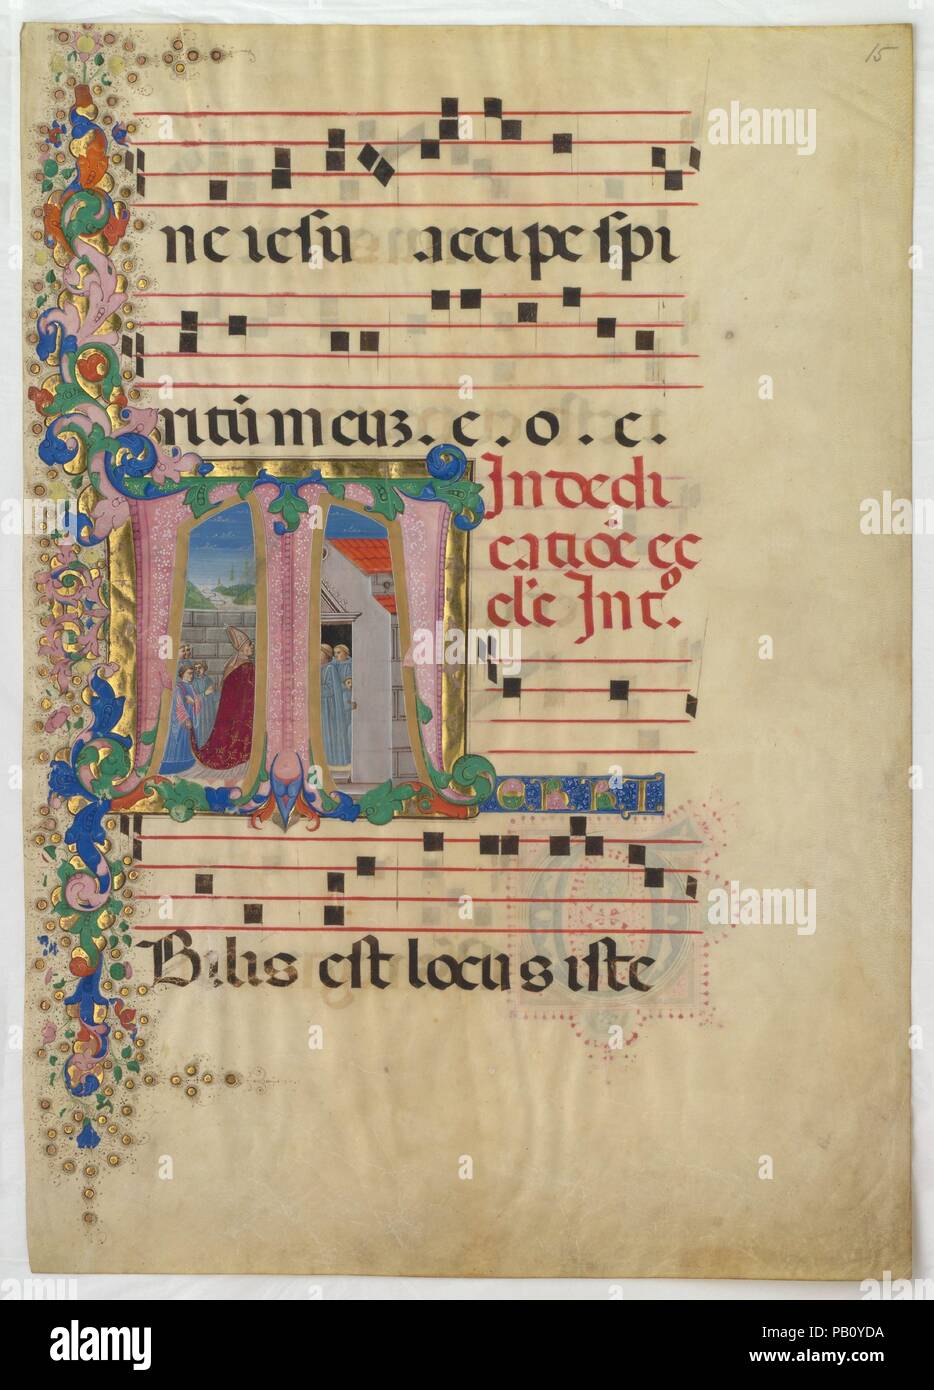 Manuscript Leaf with the Dedication of a Church in an Initial T, from a Gradual. Artist: Mariano del Buono (Italian, 1433-1504). Culture: Italian. Dimensions: Overall: 28 3/16 x 20 in. (71.6 x 50.8 cm)  Illumination: 8 1/8 x 8 1/8 in. (20.7 x 20.7 cm)  Stave Ht: 2 1/16 in. (5.3 cm)  Stave interspace: 1 15/16 in. (5 cm)  Mat size: 34 3/16 x 27 3/16 in. (86.9 x 69.1 cm). Date: second half 15th century.  A prolific artist, Mariano del Buono's commissions include sacred books for both Christian and Jewish use. His painting on this large parchment leaf depicts the arrival of a pope at a church, and Stock Photo